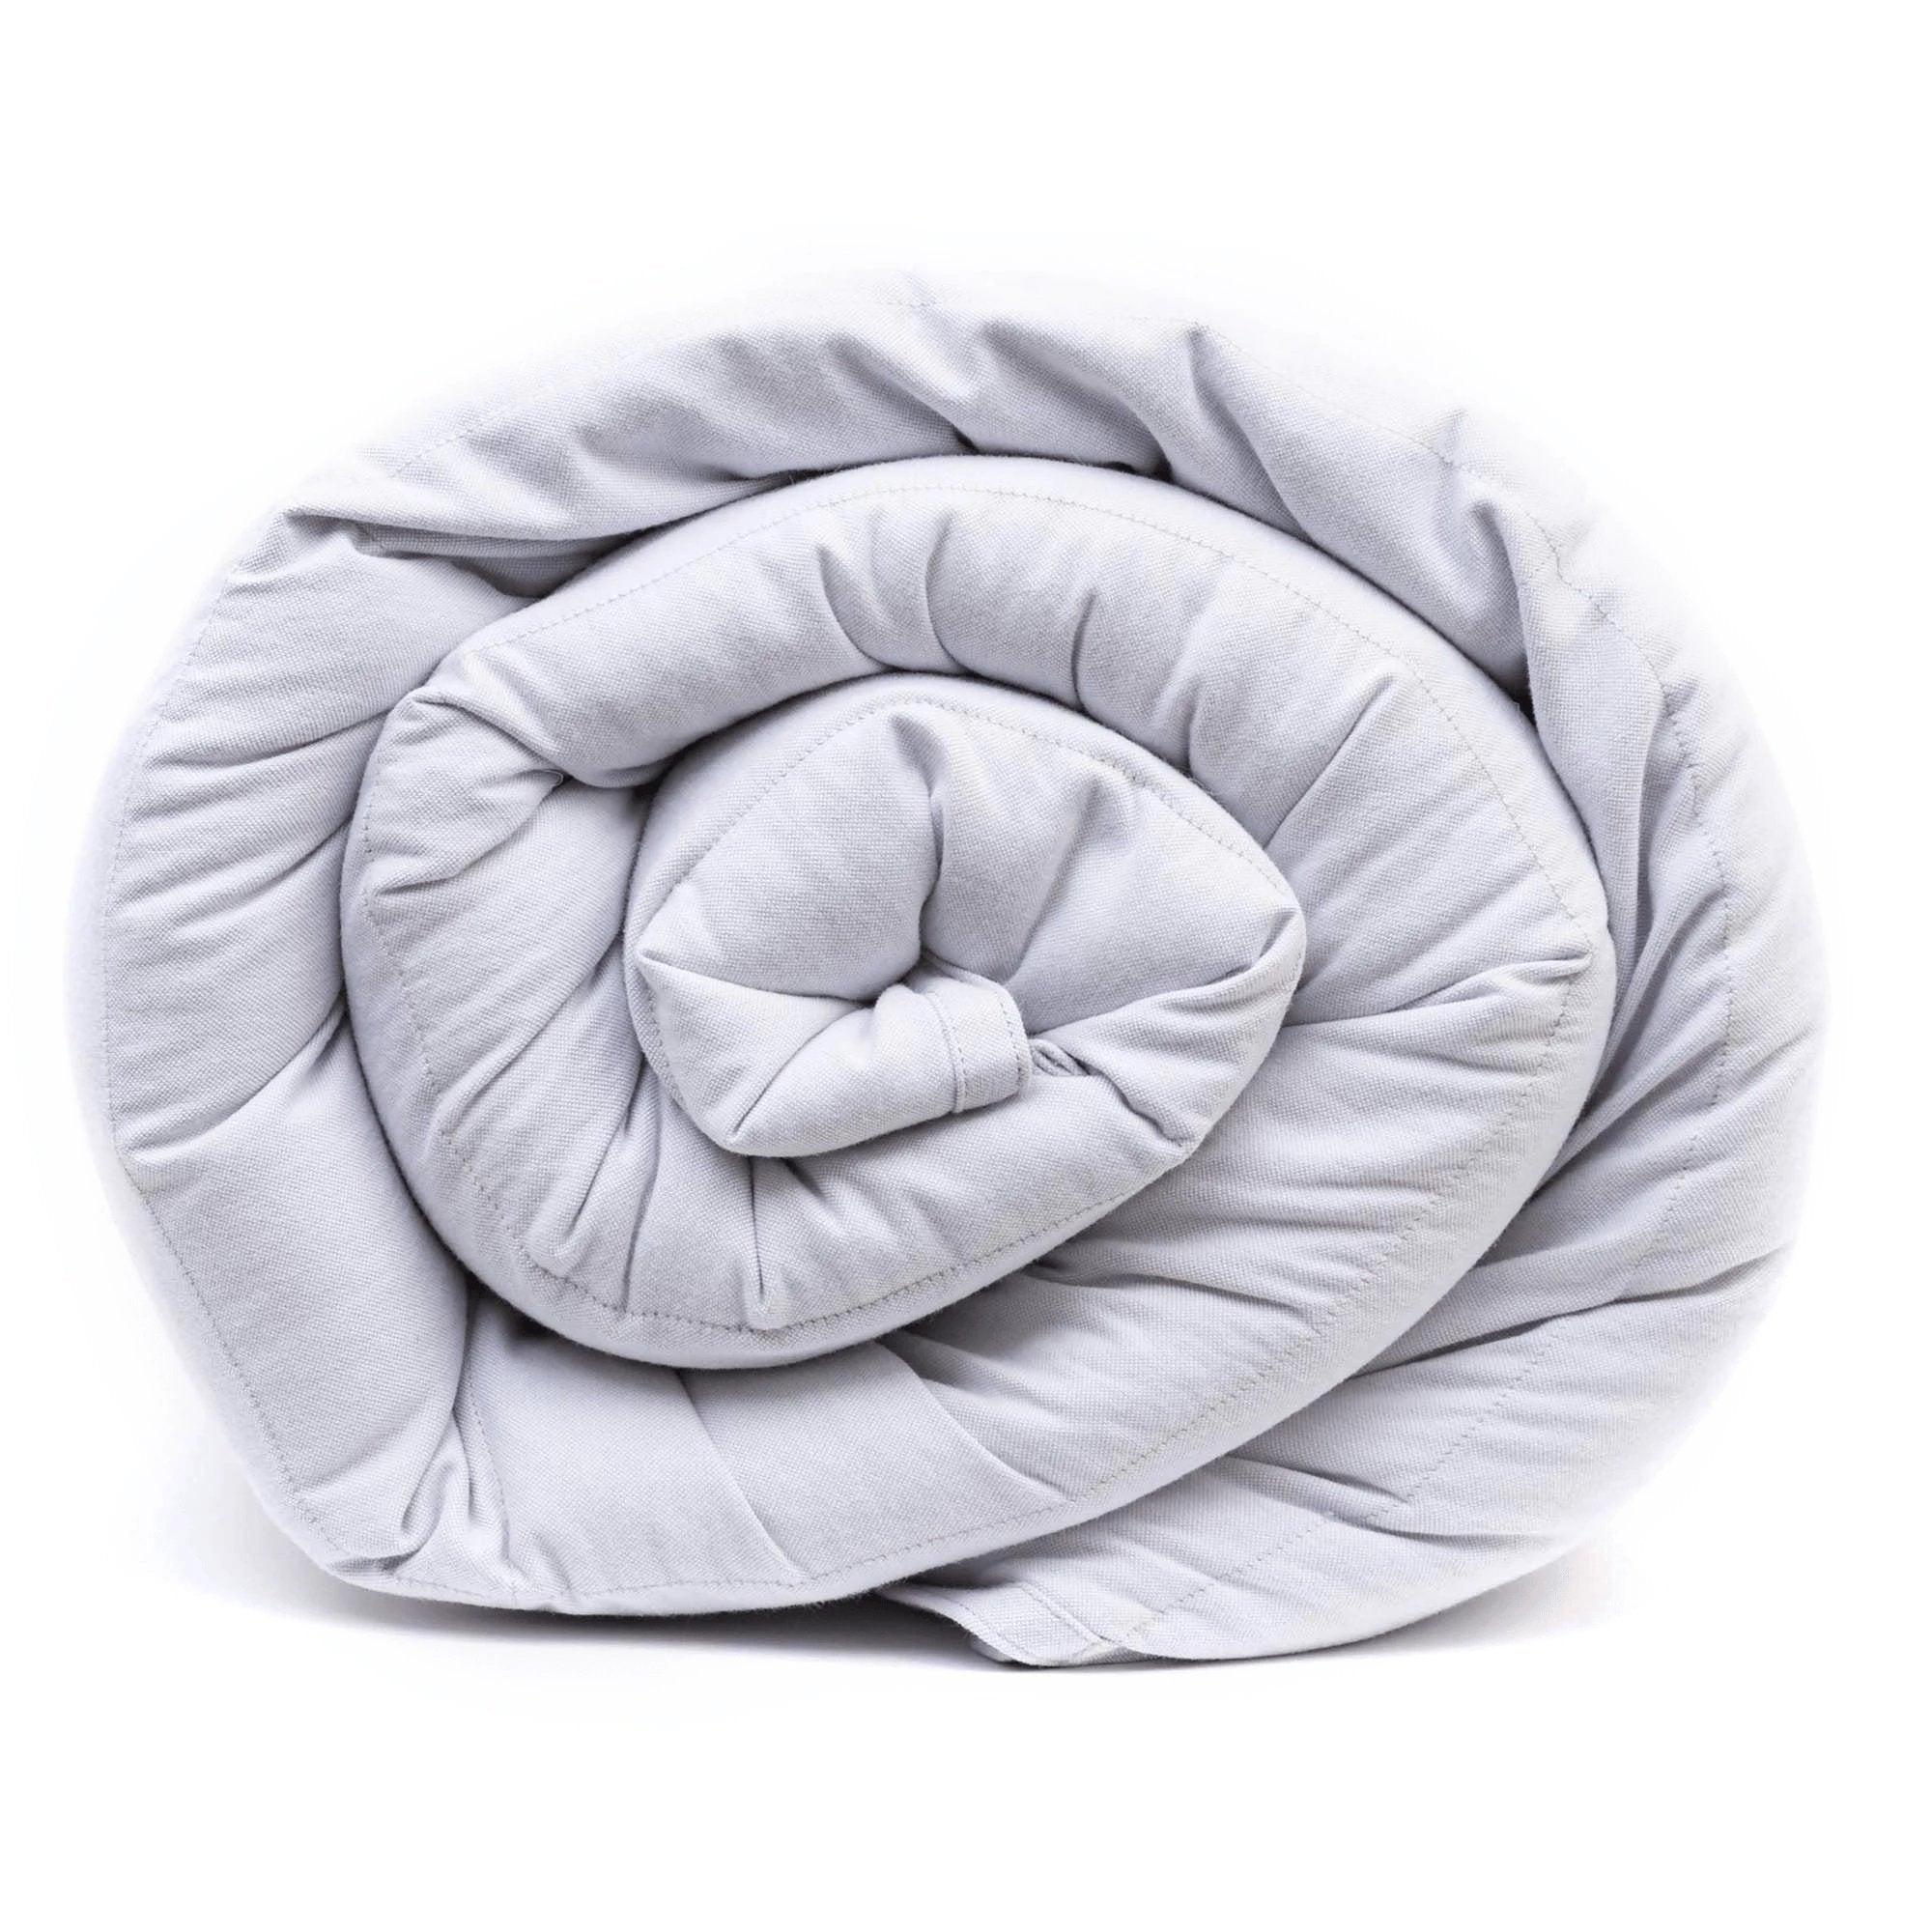 Best Selling Weighted Blankets